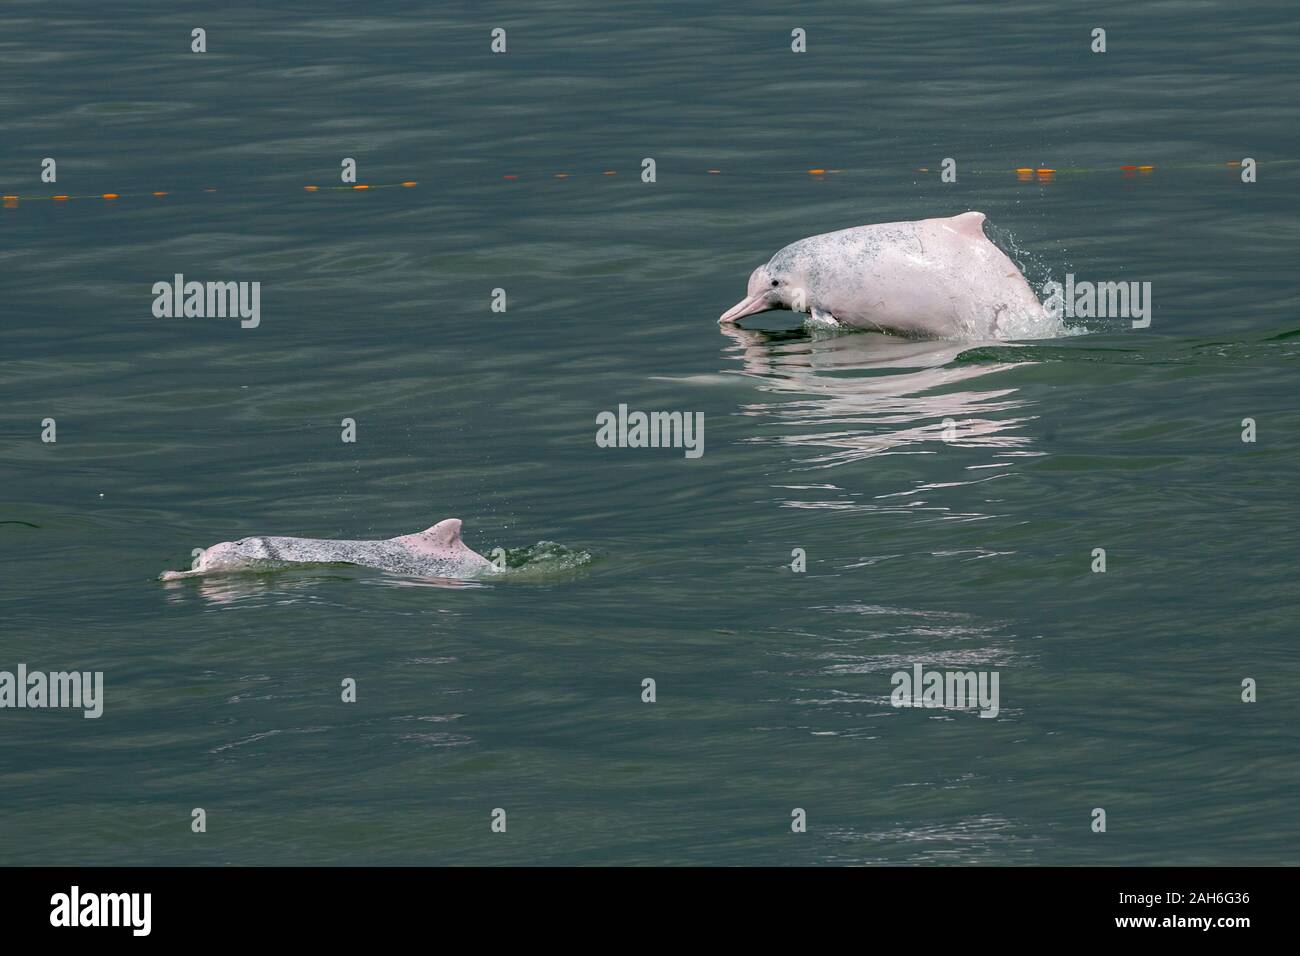 Indo-Pacific Humpback Dolphin / Chinese White Dolphin / Pink Dolphin (Sousa Chinensis) in the waters of Hong Kong, near a broken fishing net Stock Photo